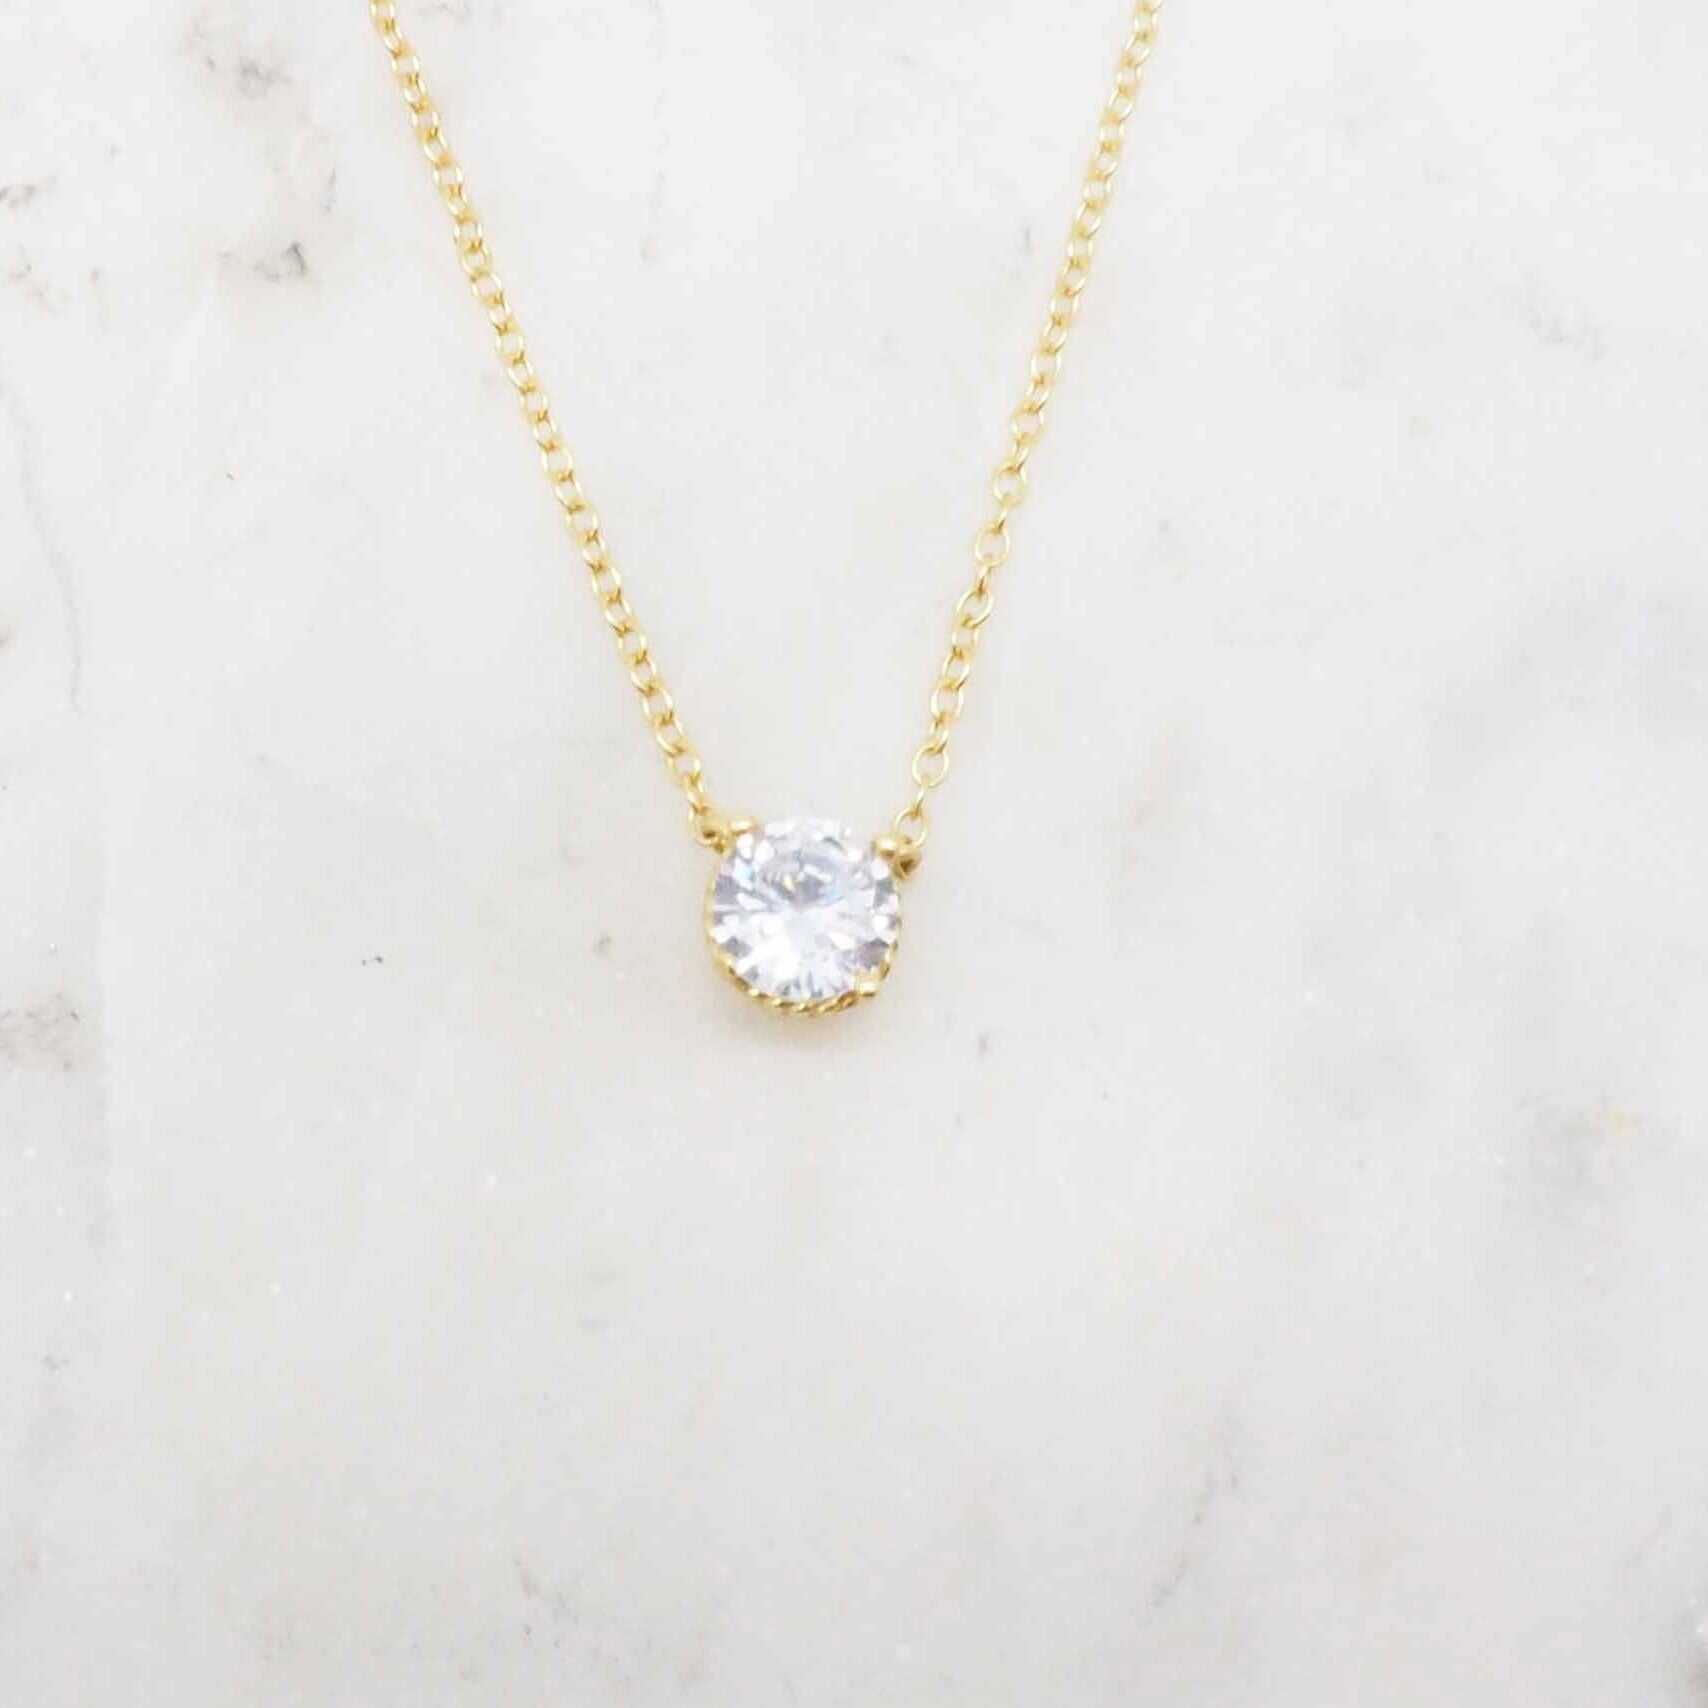 The Golden Solitaire - Necklace